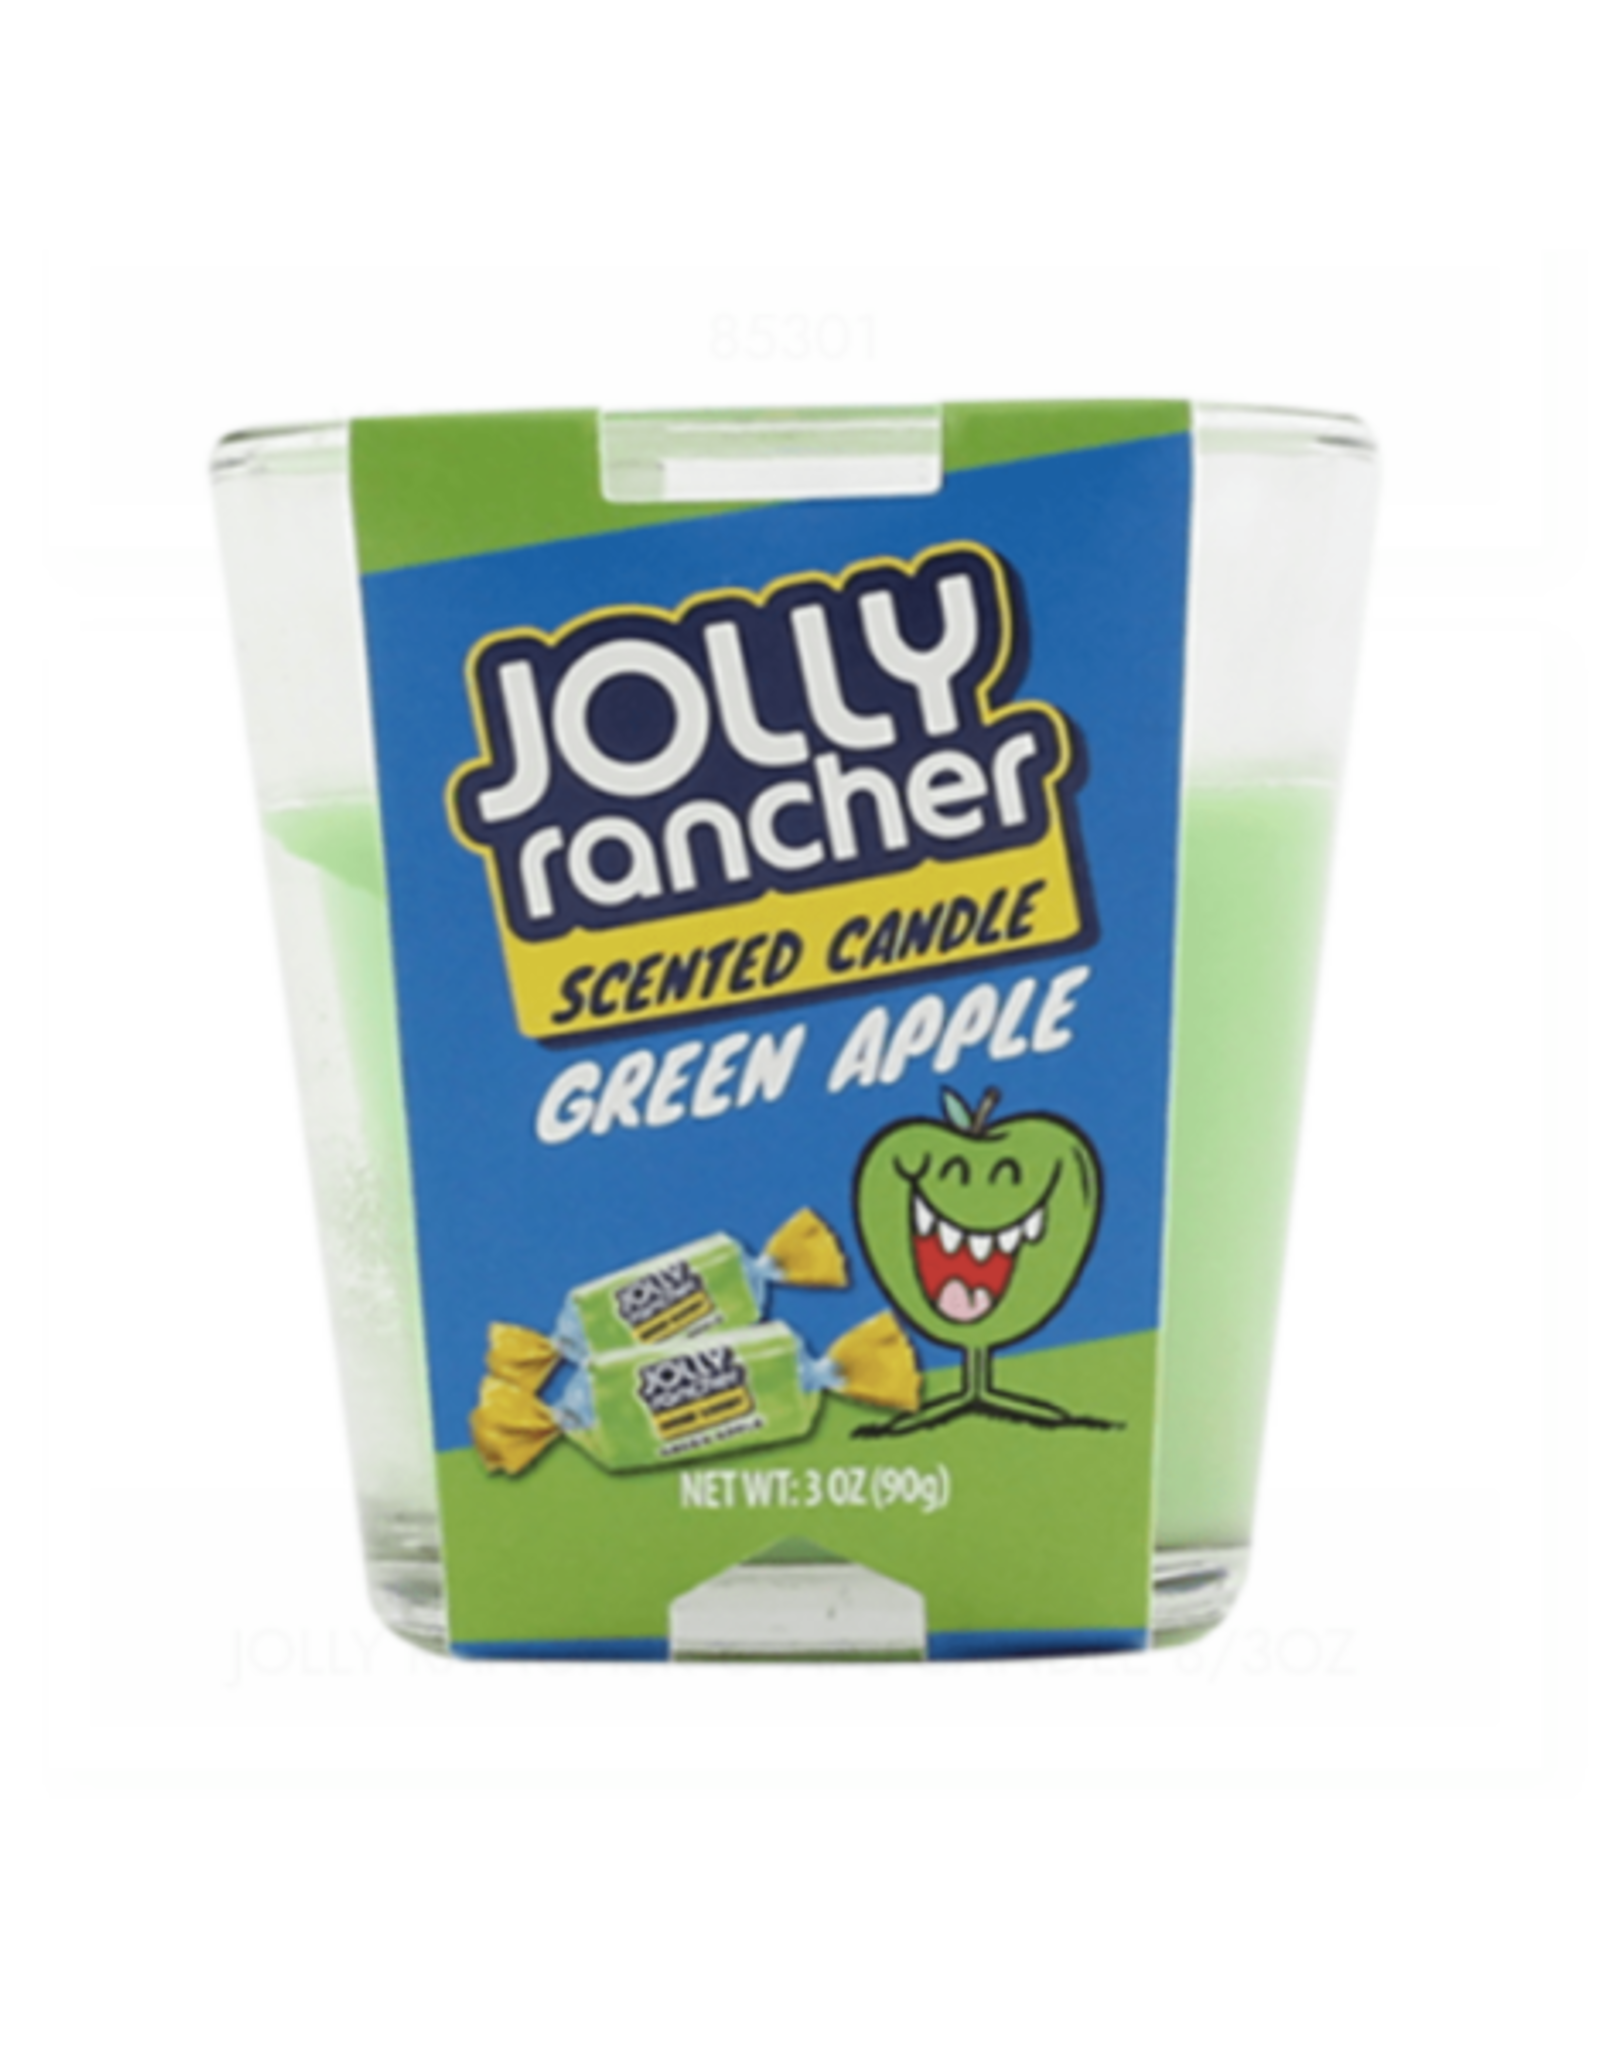 Jolly Rancher Scented Candle Green Apple